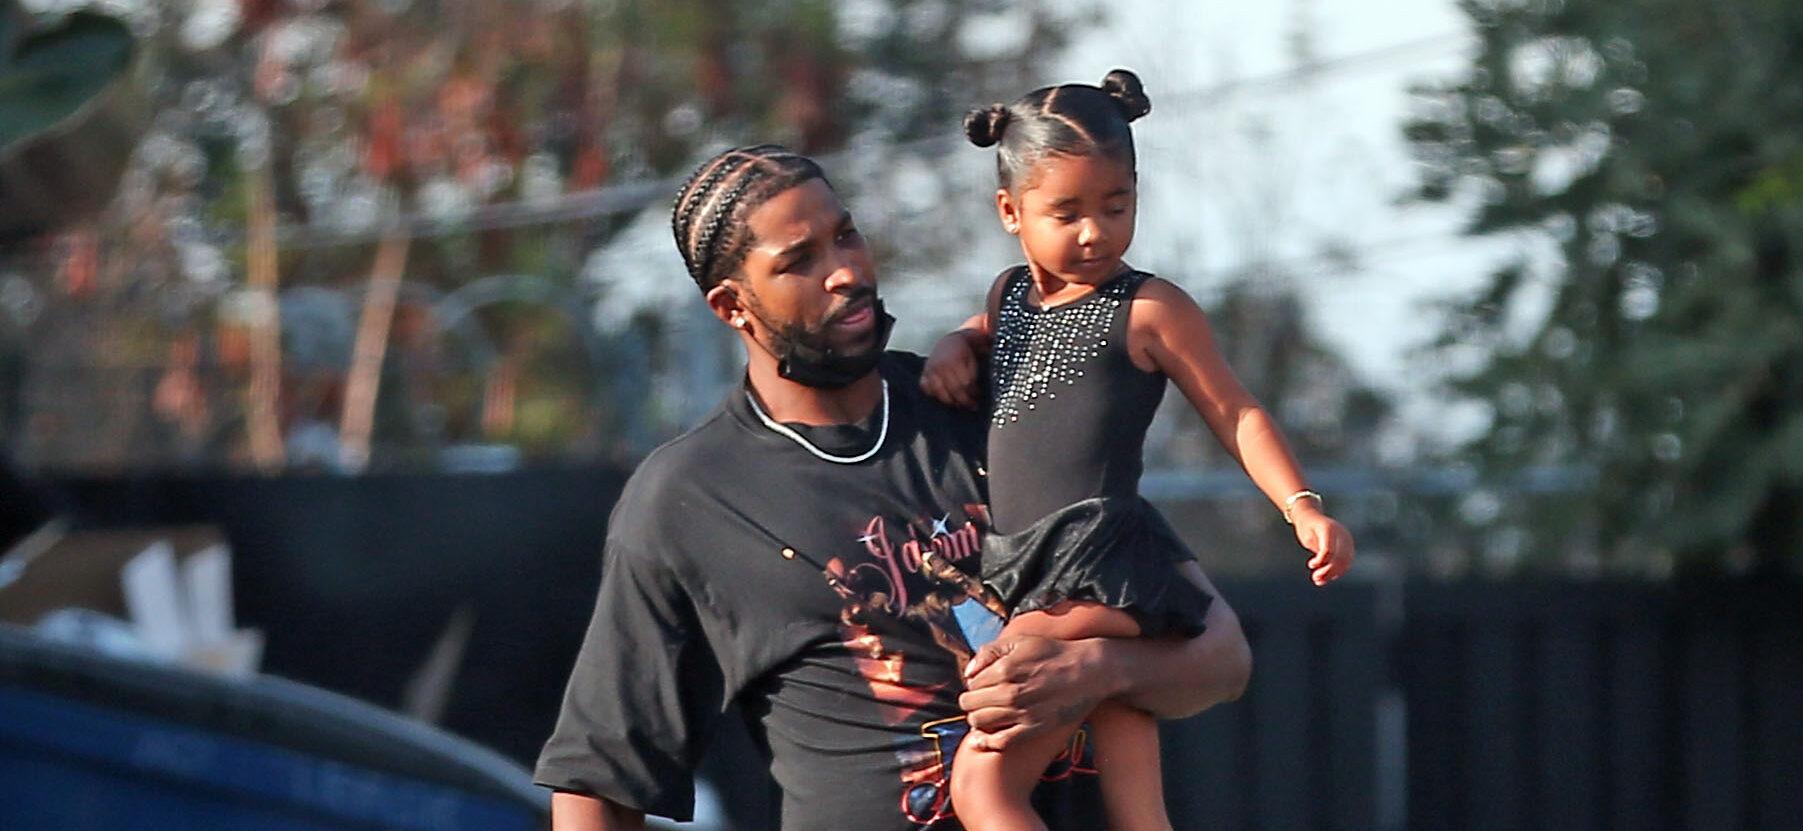 Khloe Kardashian and Tristan Thompson take their daughter True to her dance class